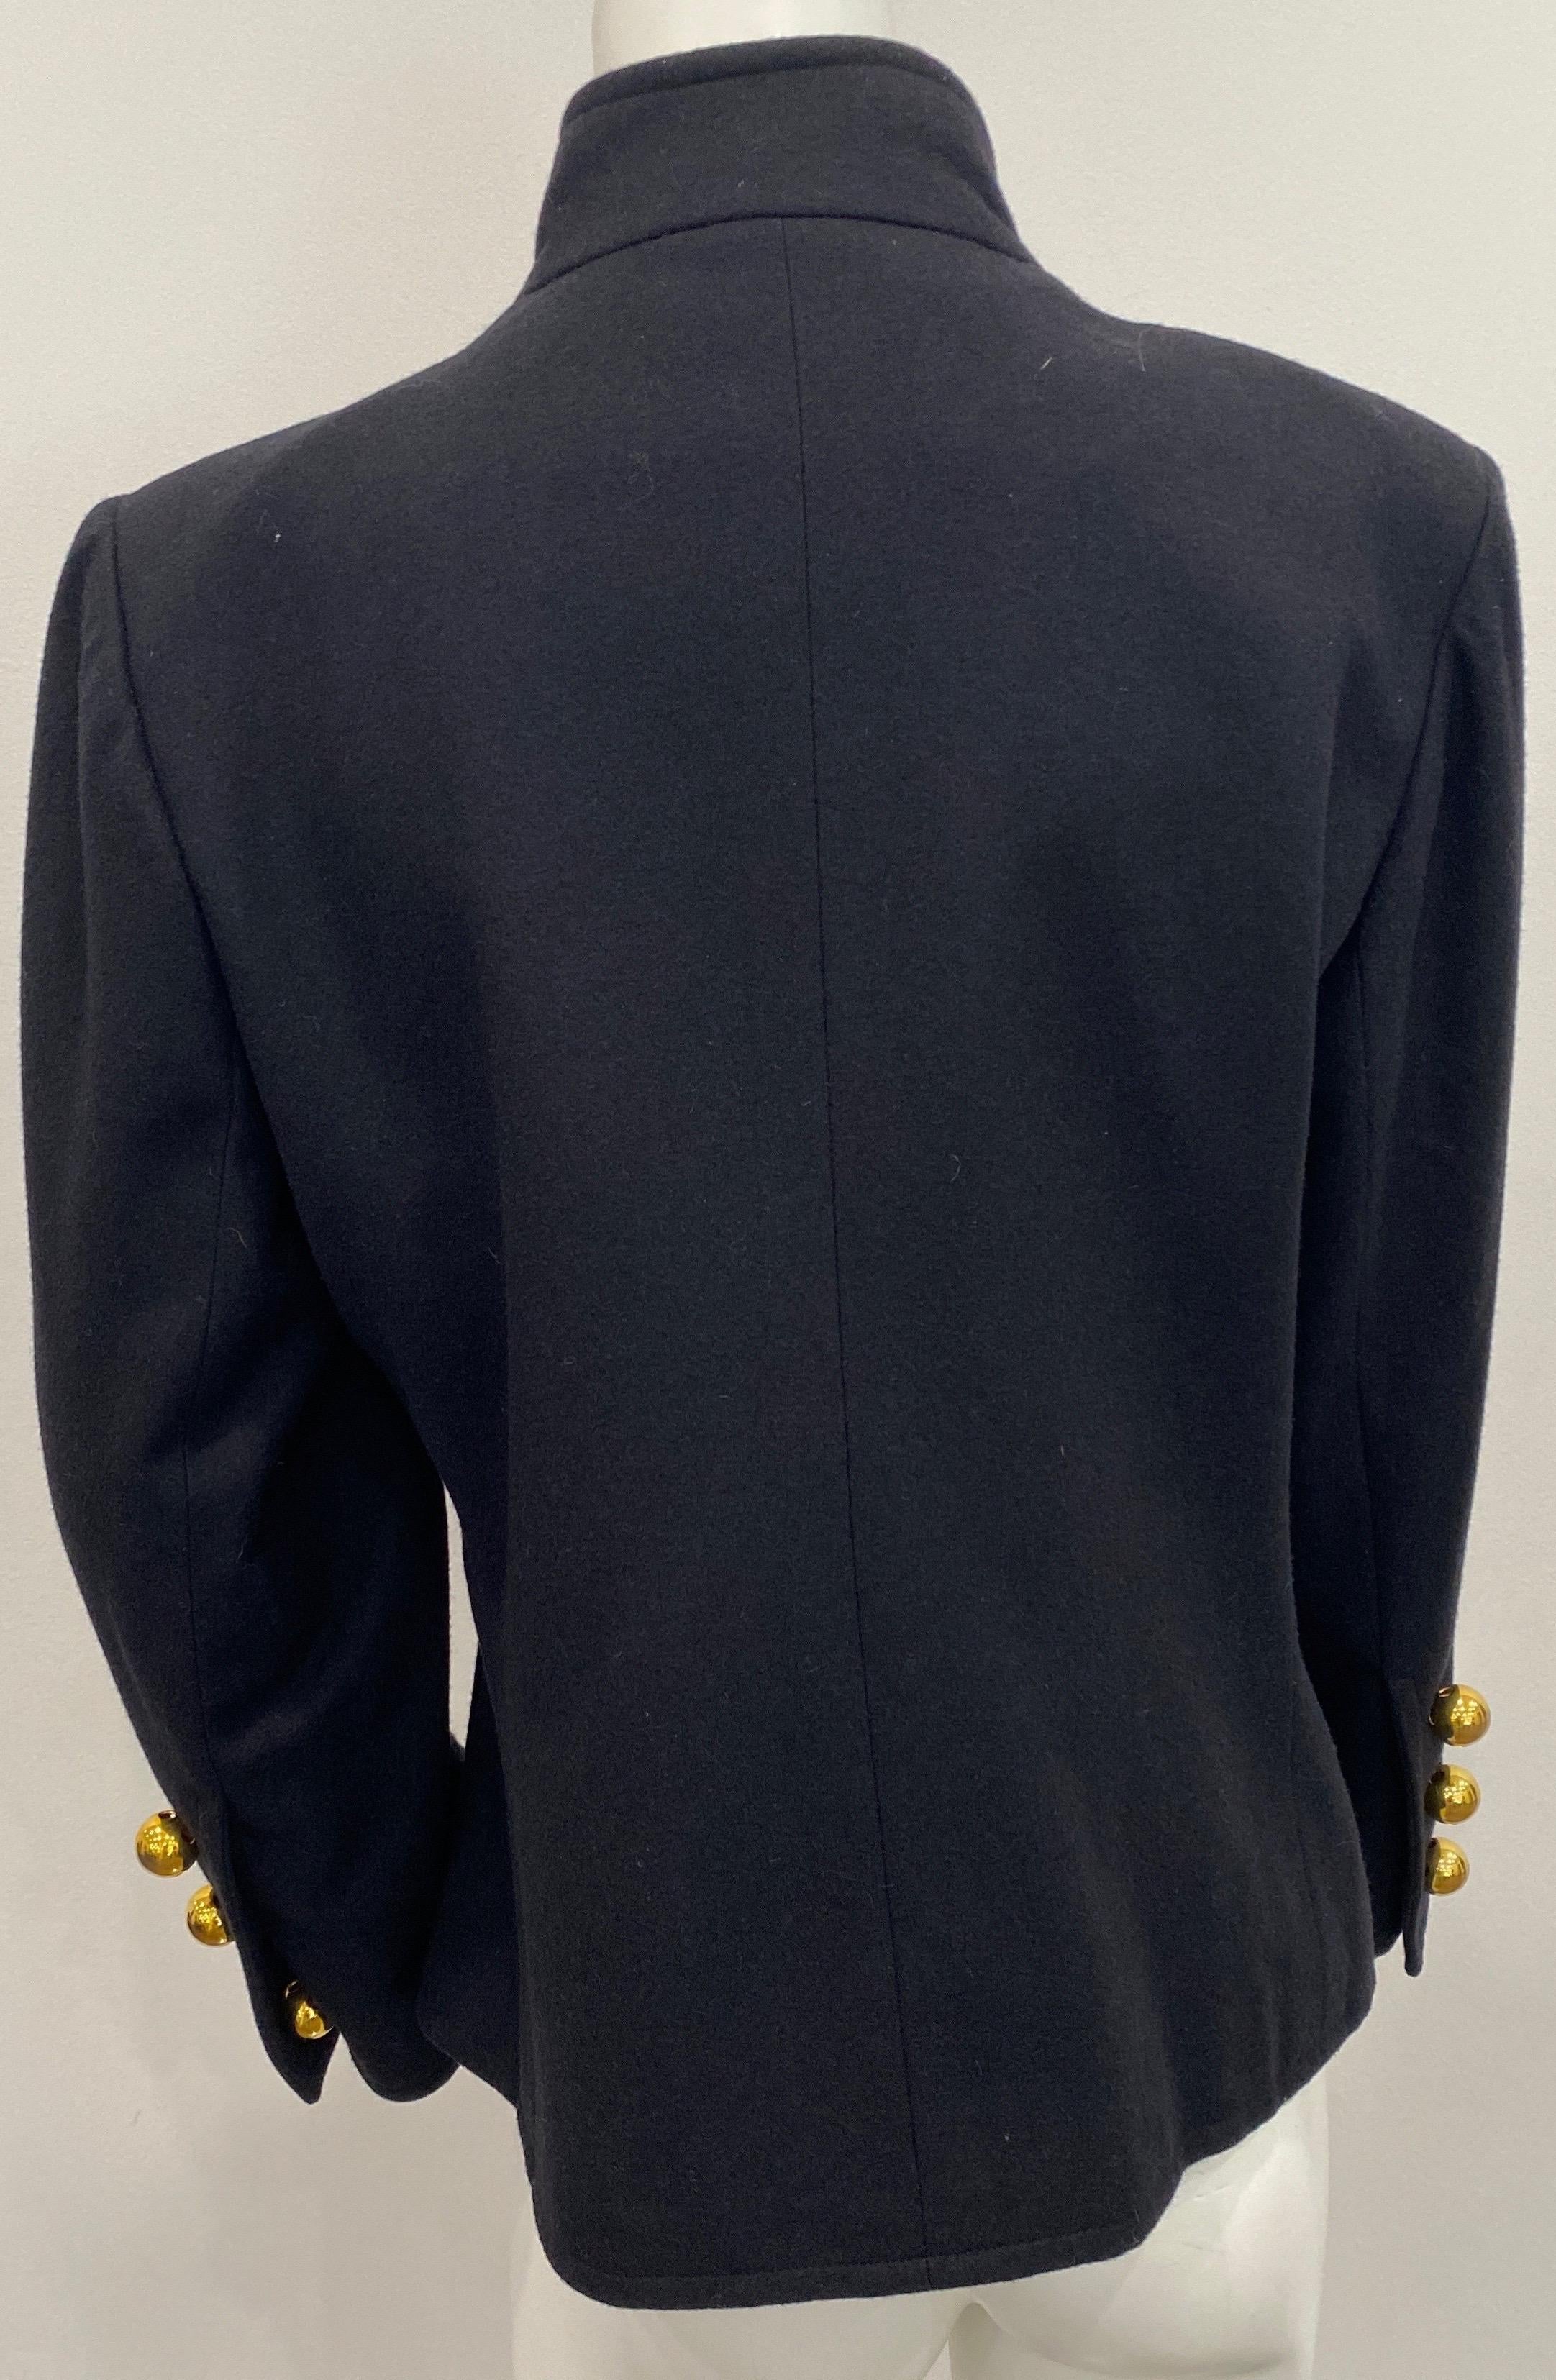 Yves Saint Laurent 1970's Black Soft Double-Faced Wool Jacket - Size 44 For Sale 4